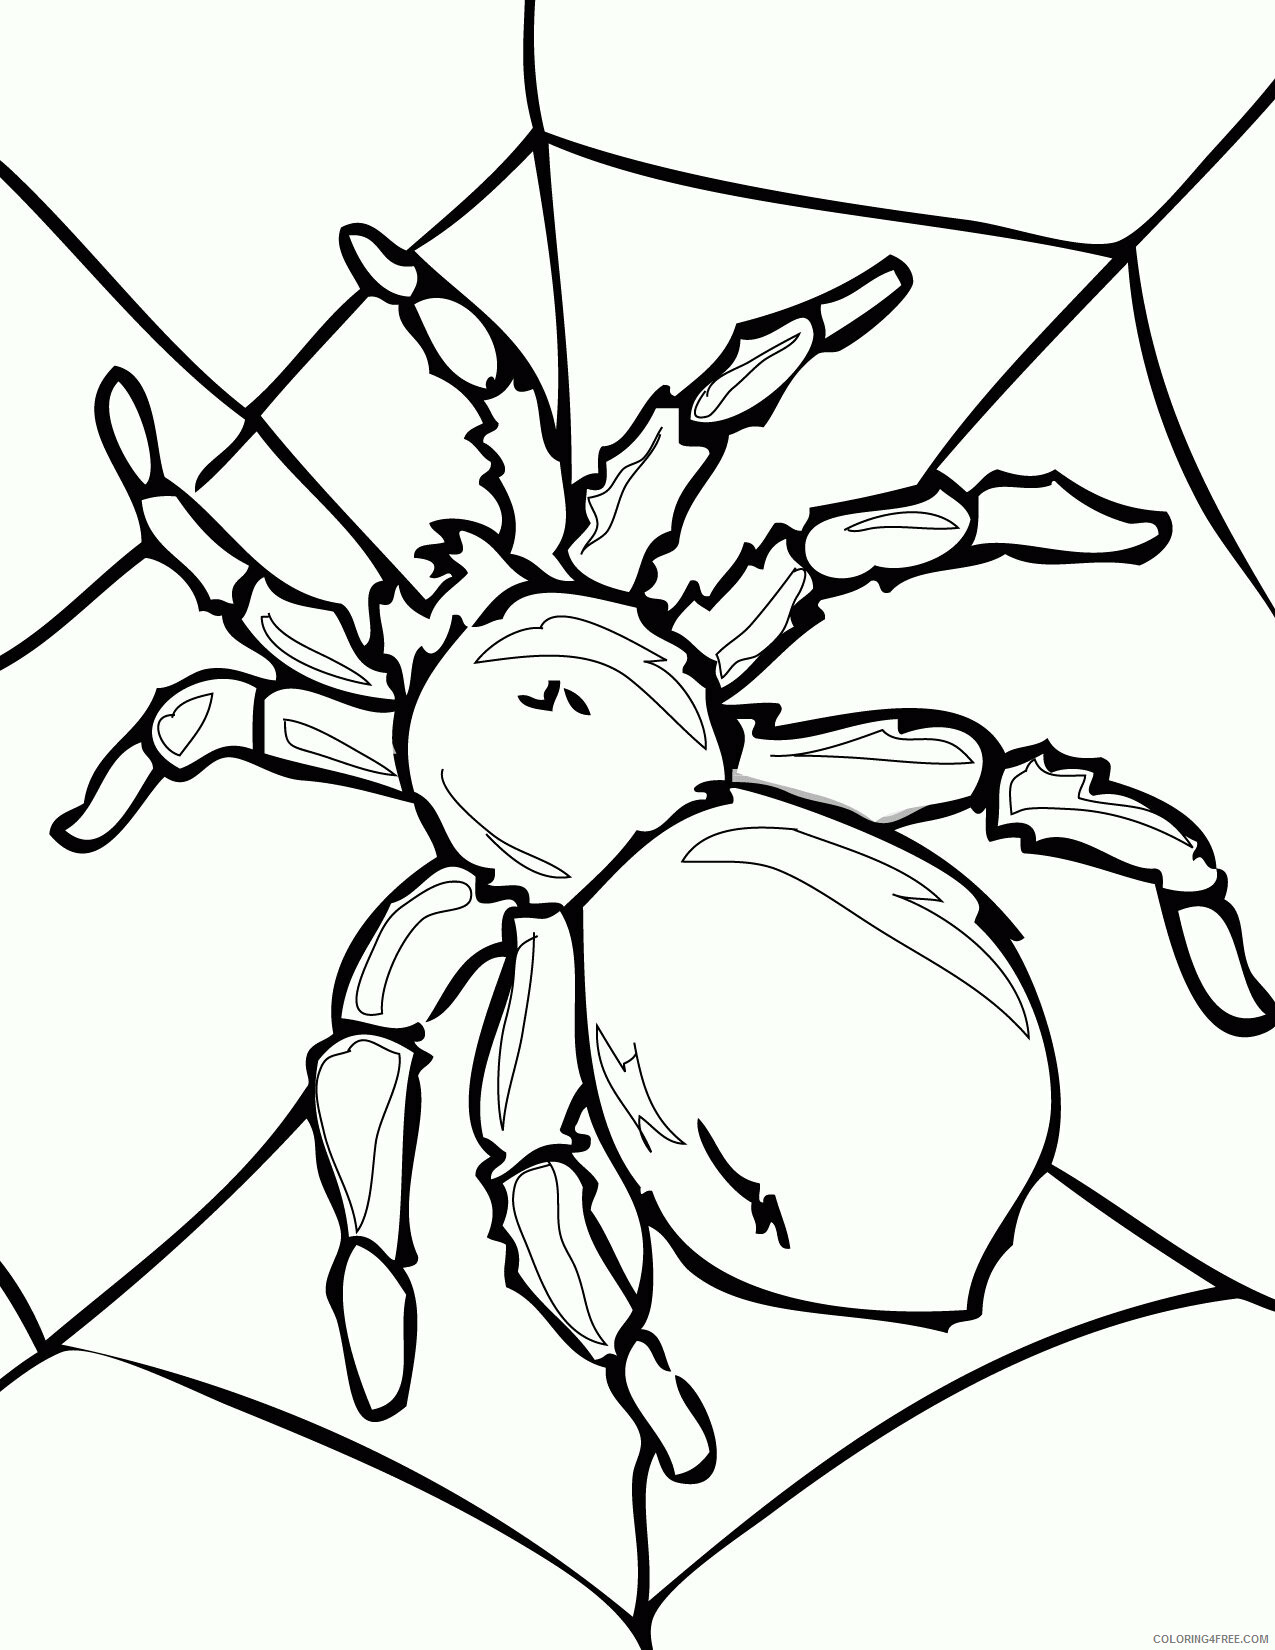 Spider Coloring Sheets Animal Coloring Pages Printable 2021 4264 Coloring4free